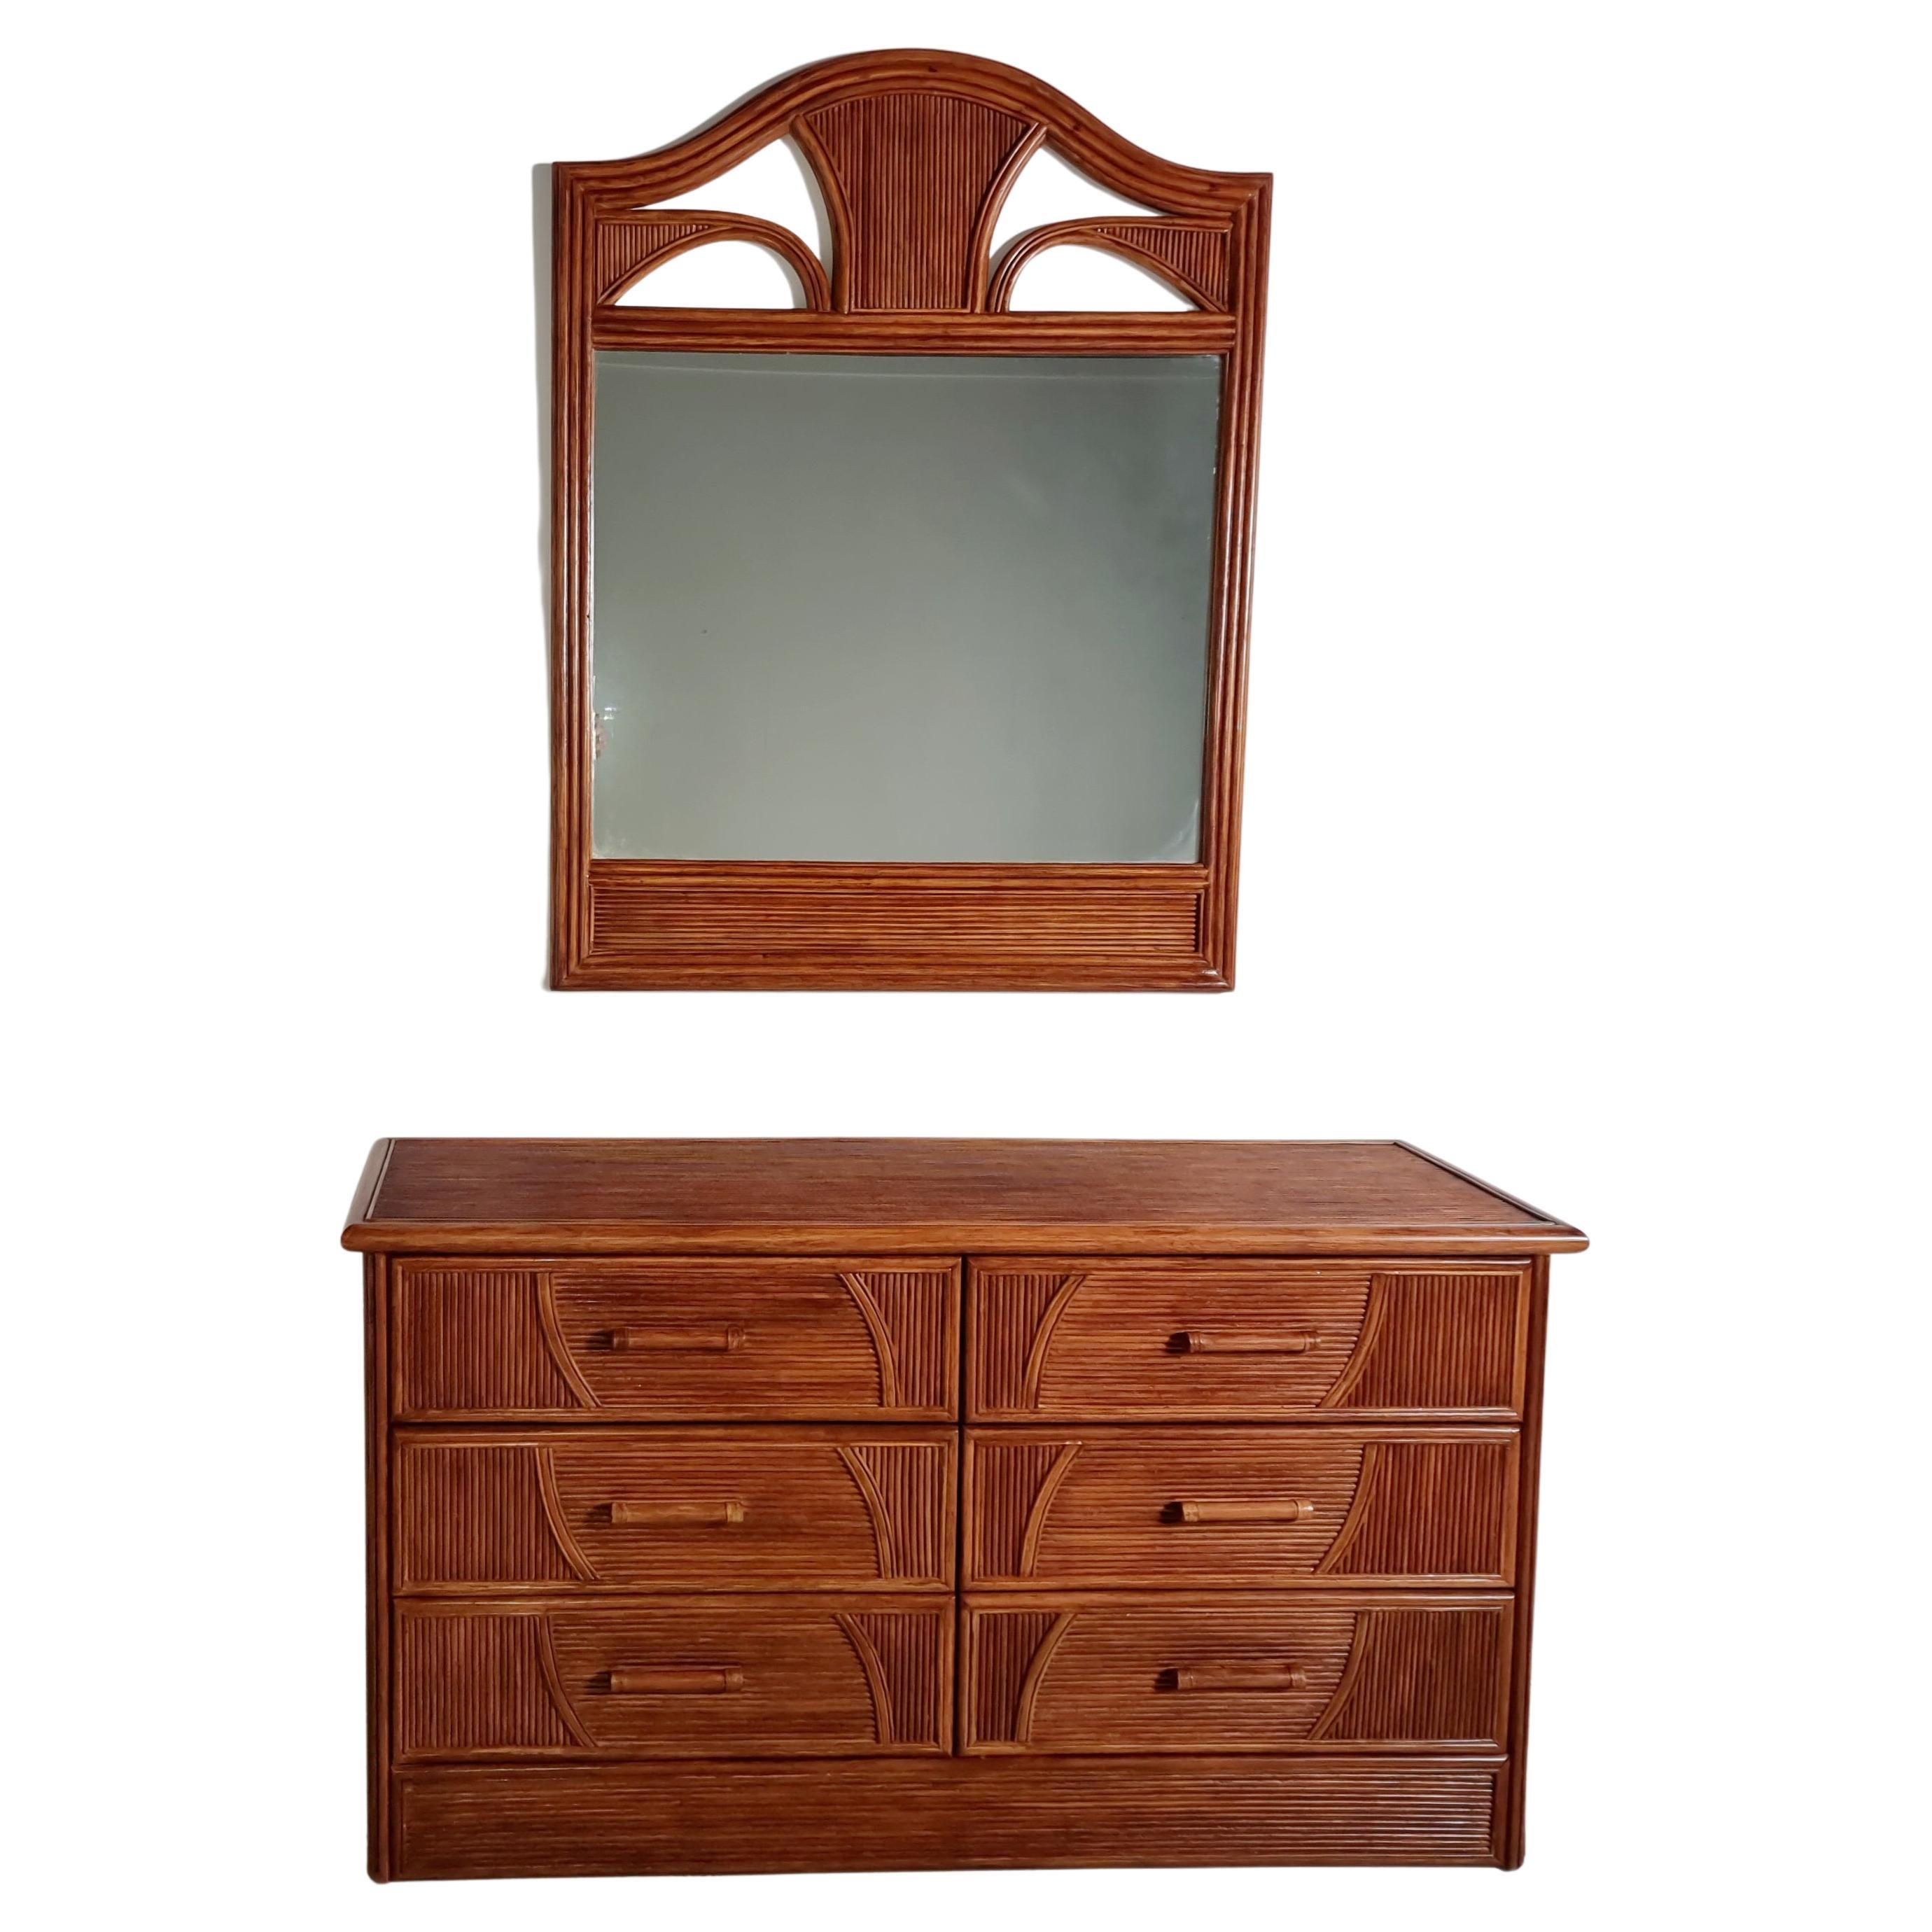 Walnut veneer Dresser with Matching Mirror from Italy, 1970s For Sale